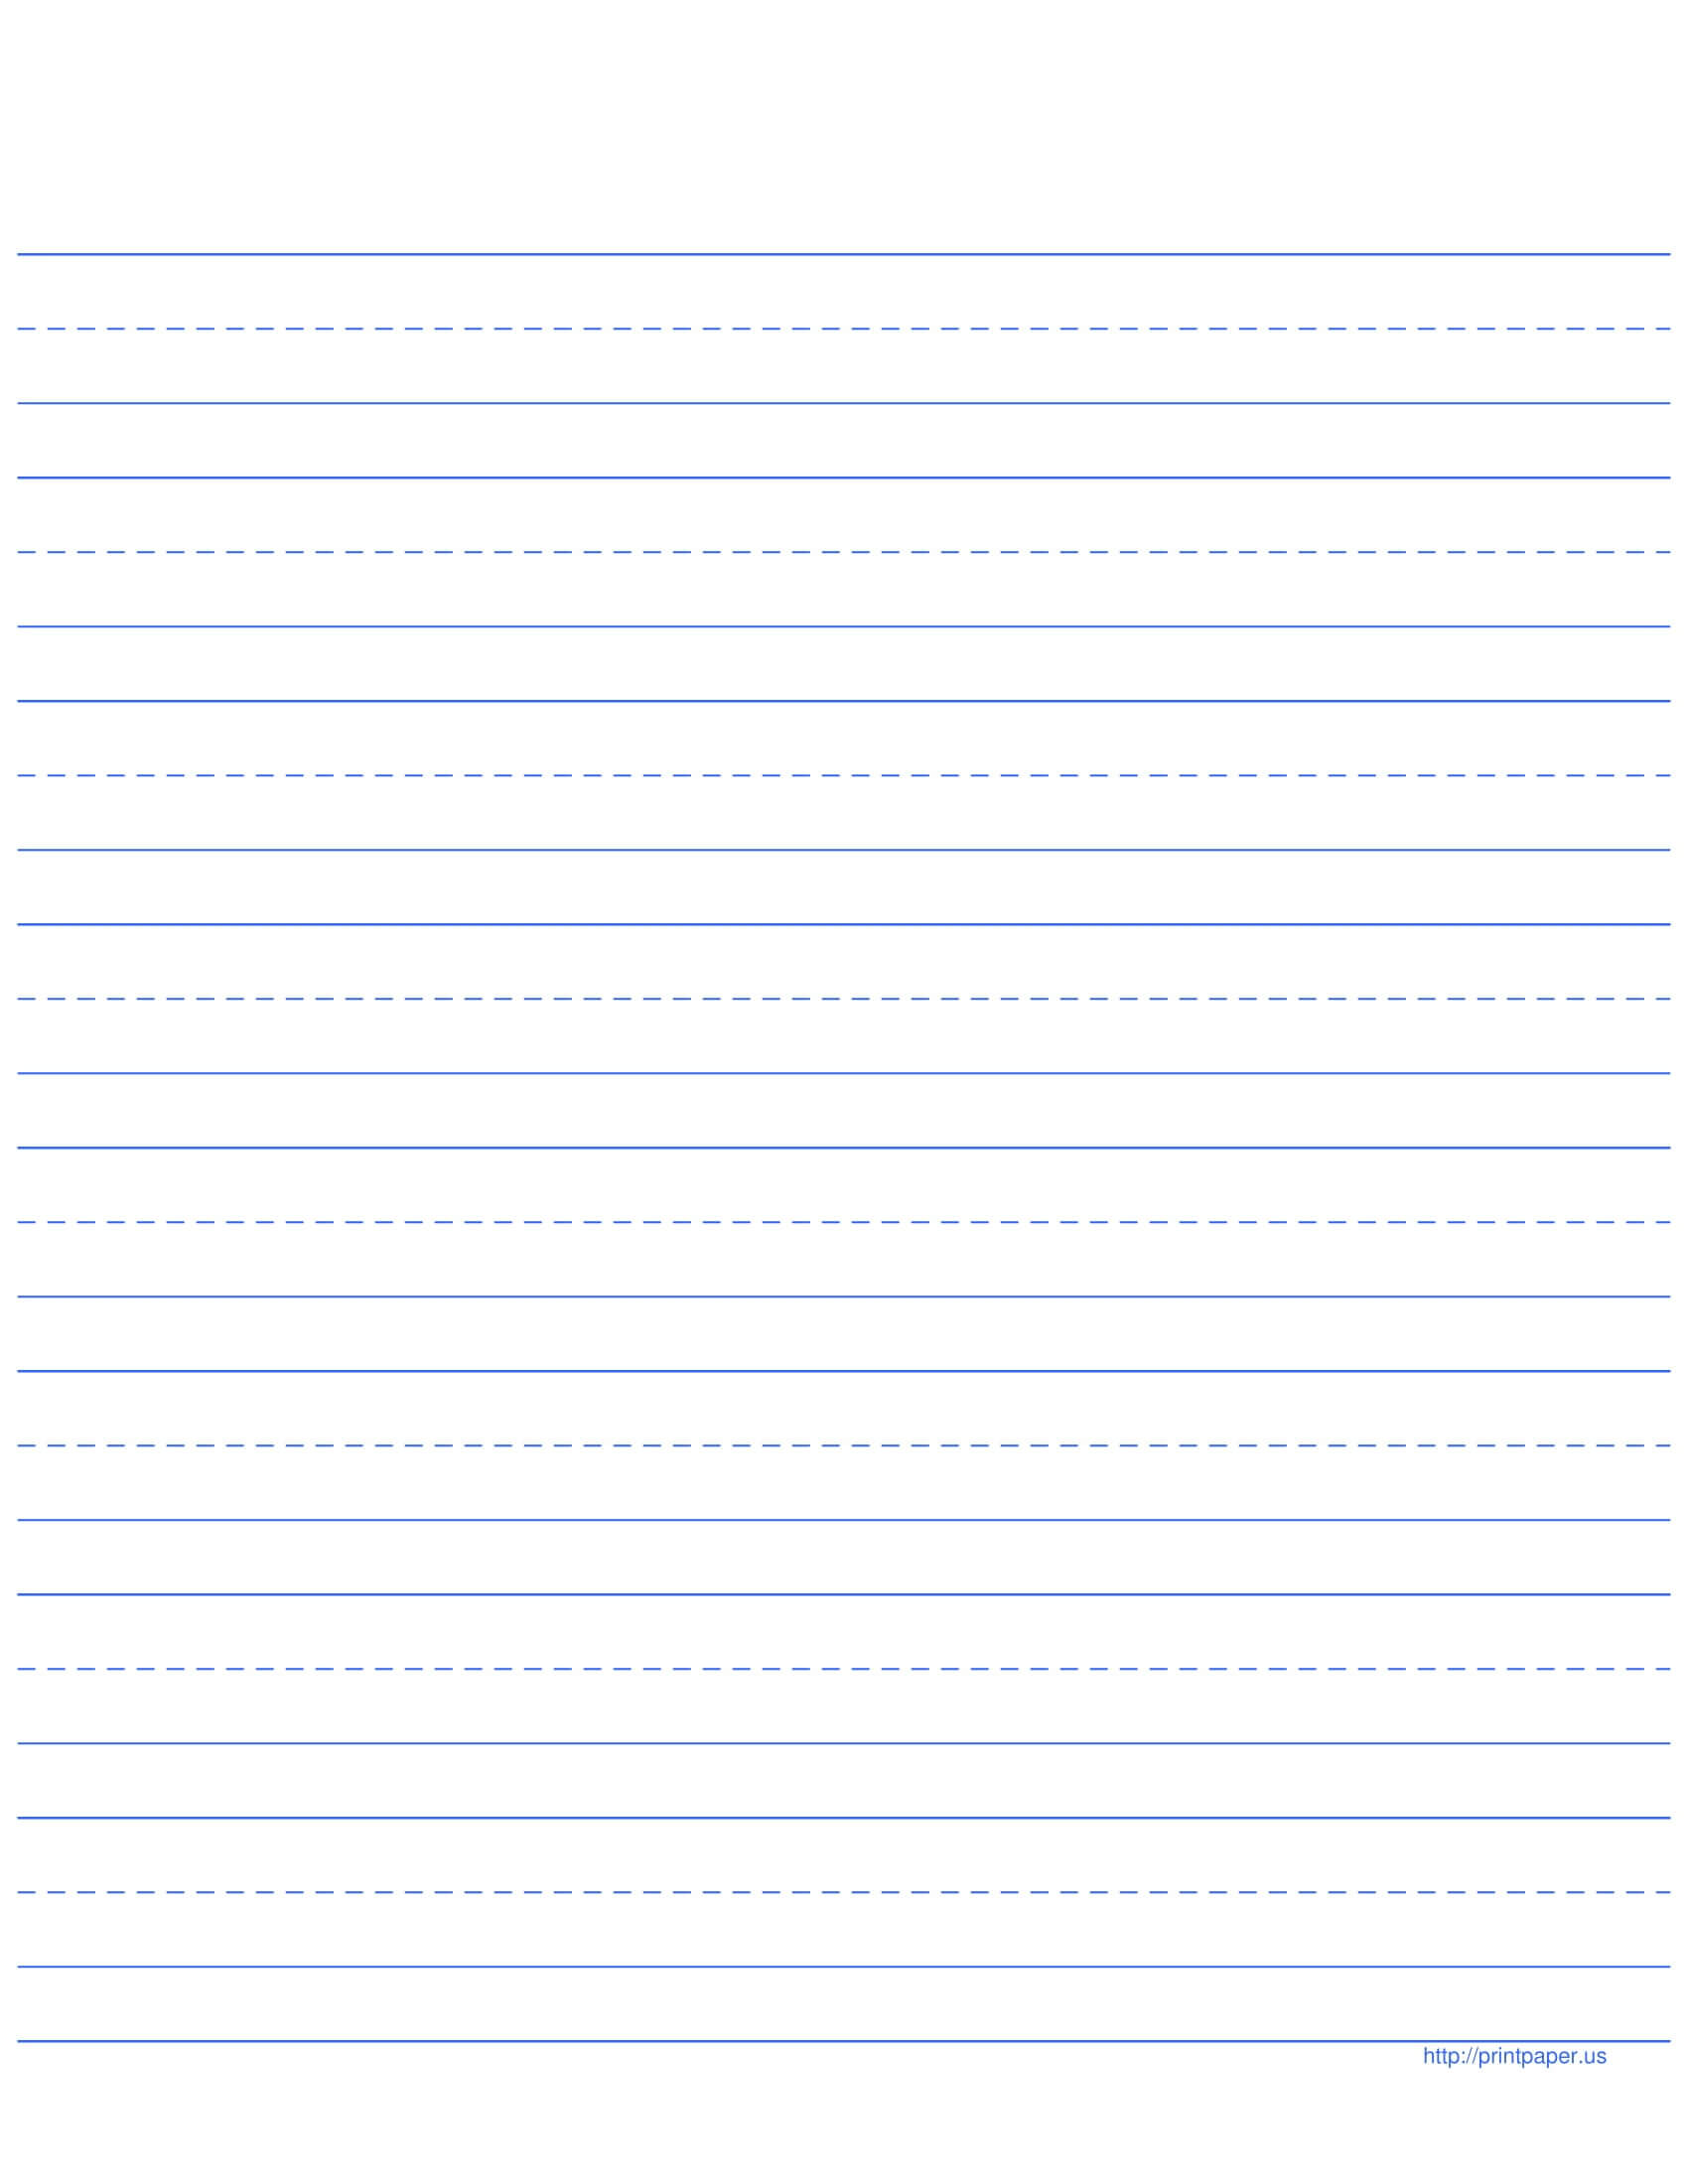 11+ Lined Paper Templates – Pdf | Free & Premium Templates Inside Ruled Paper Word Template